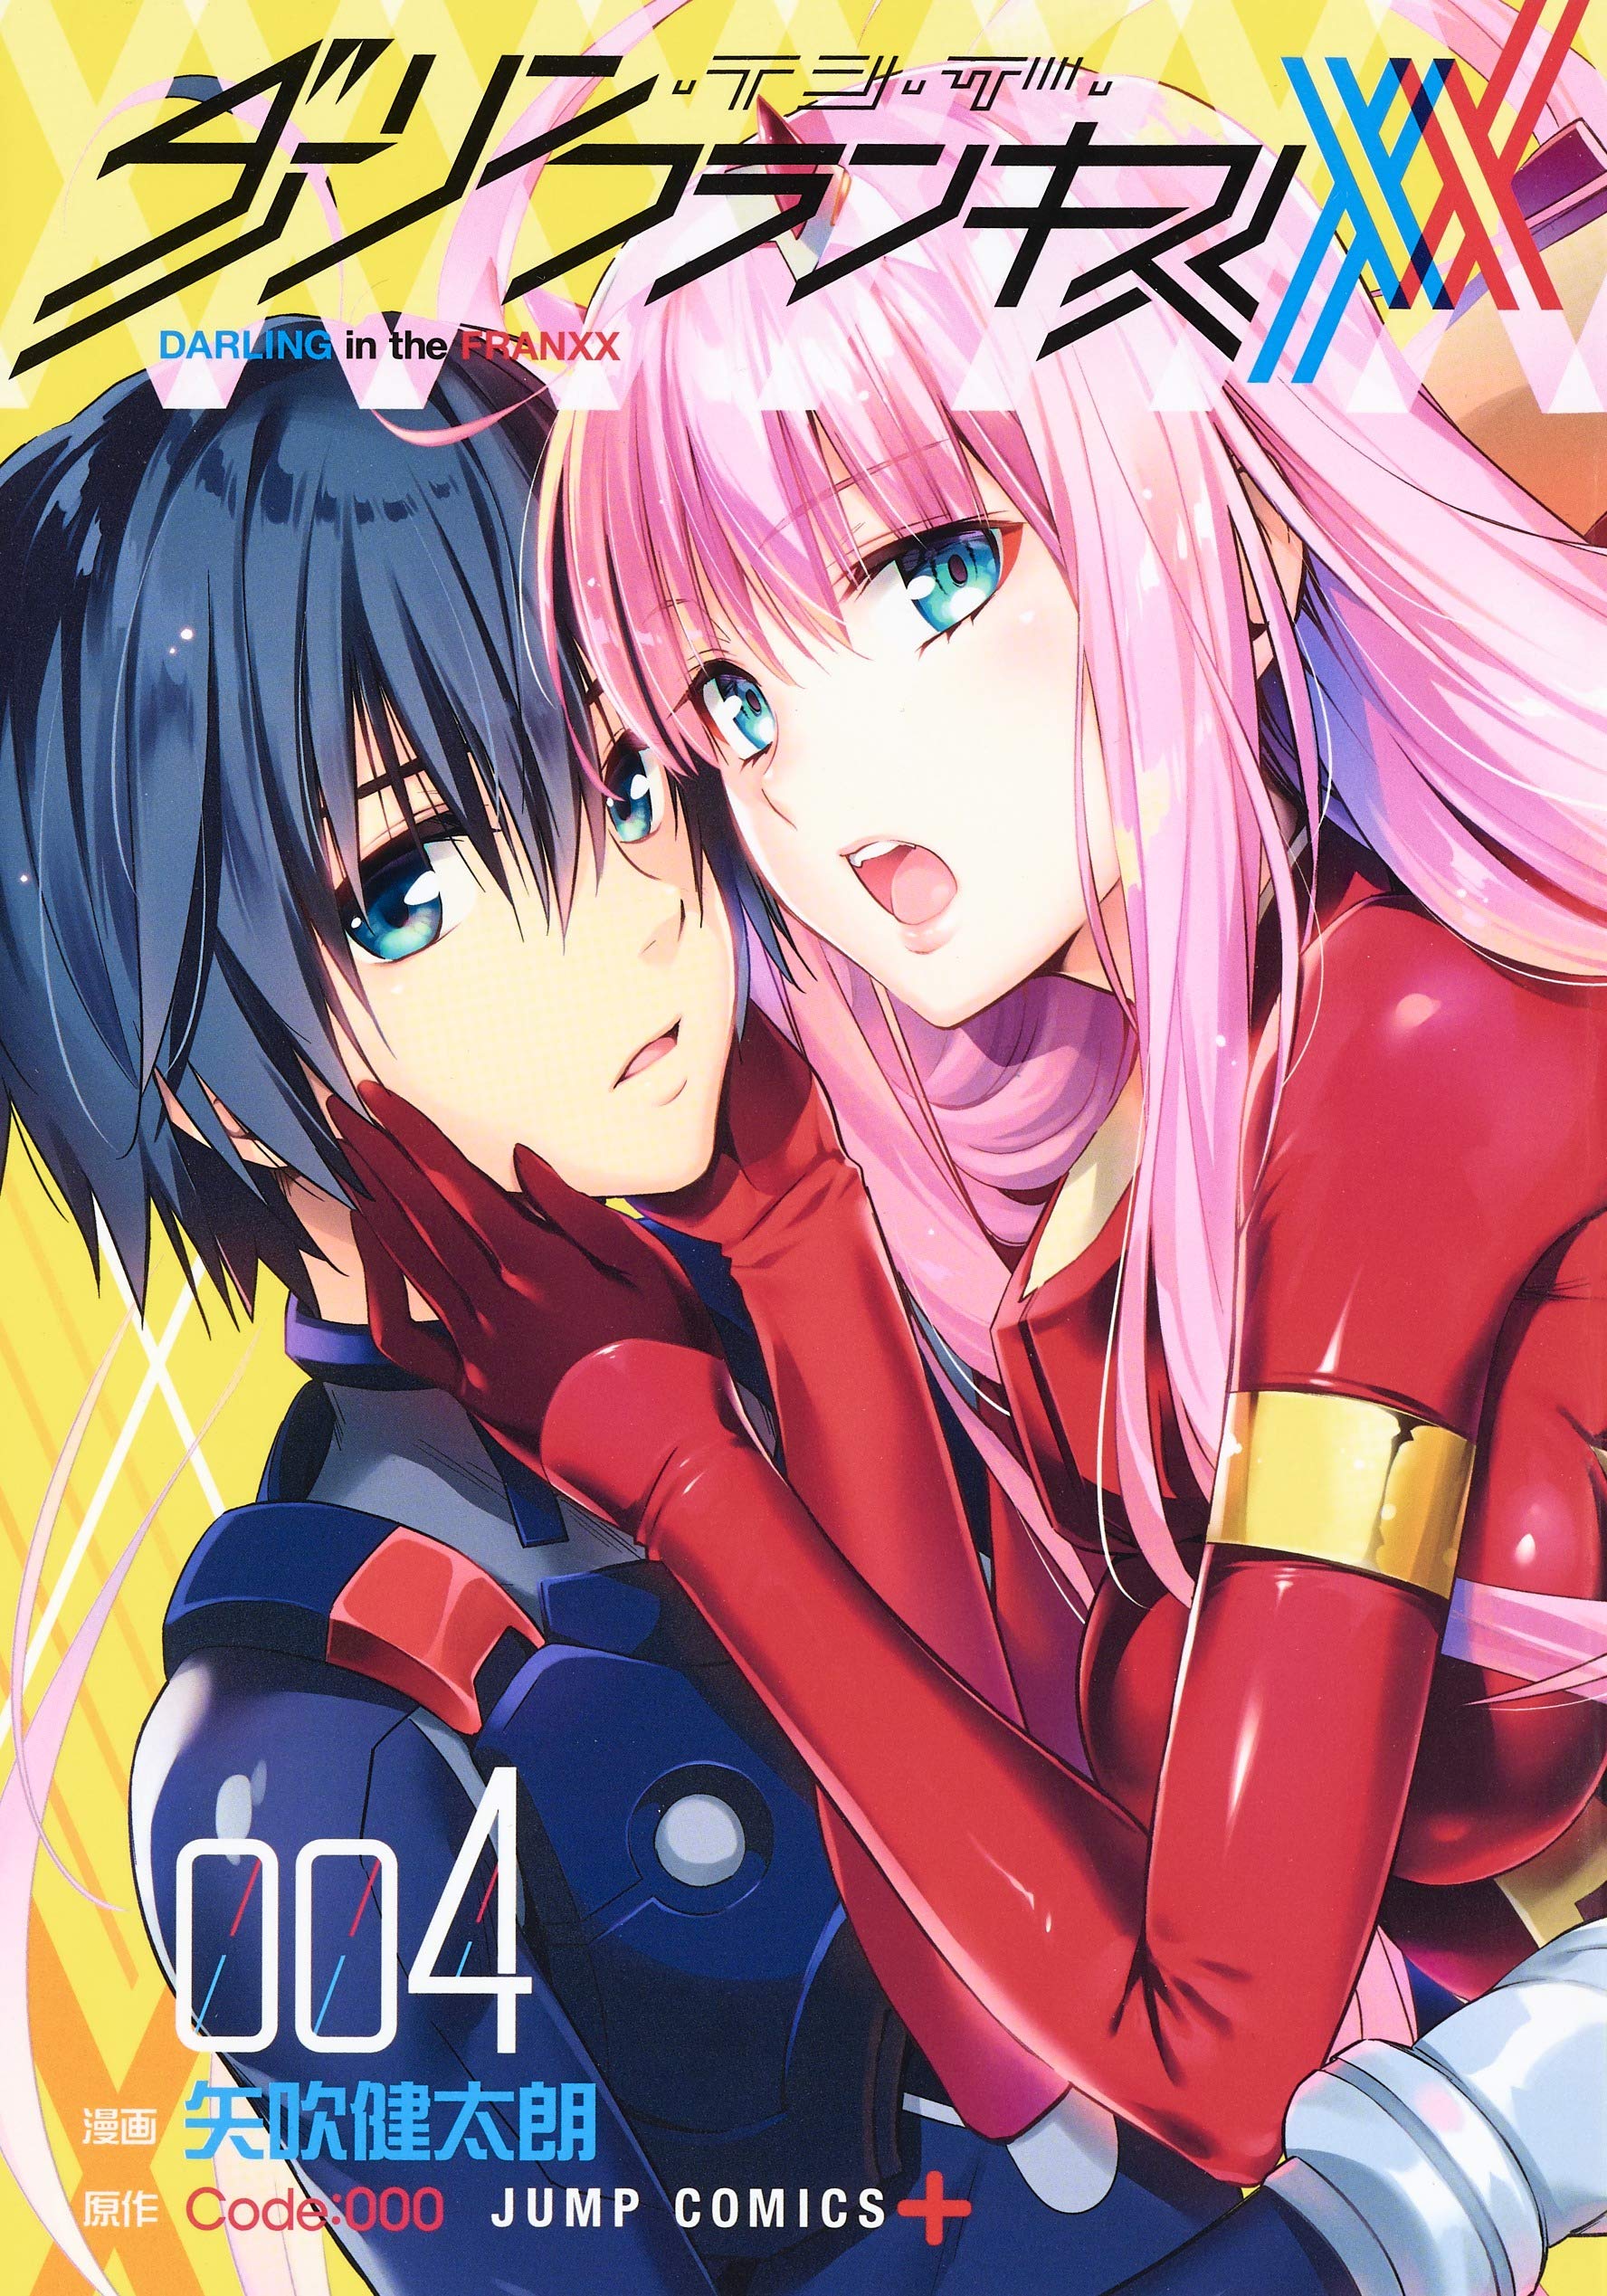 Review of the New Darling in the Franxx Manga - Anime Collective